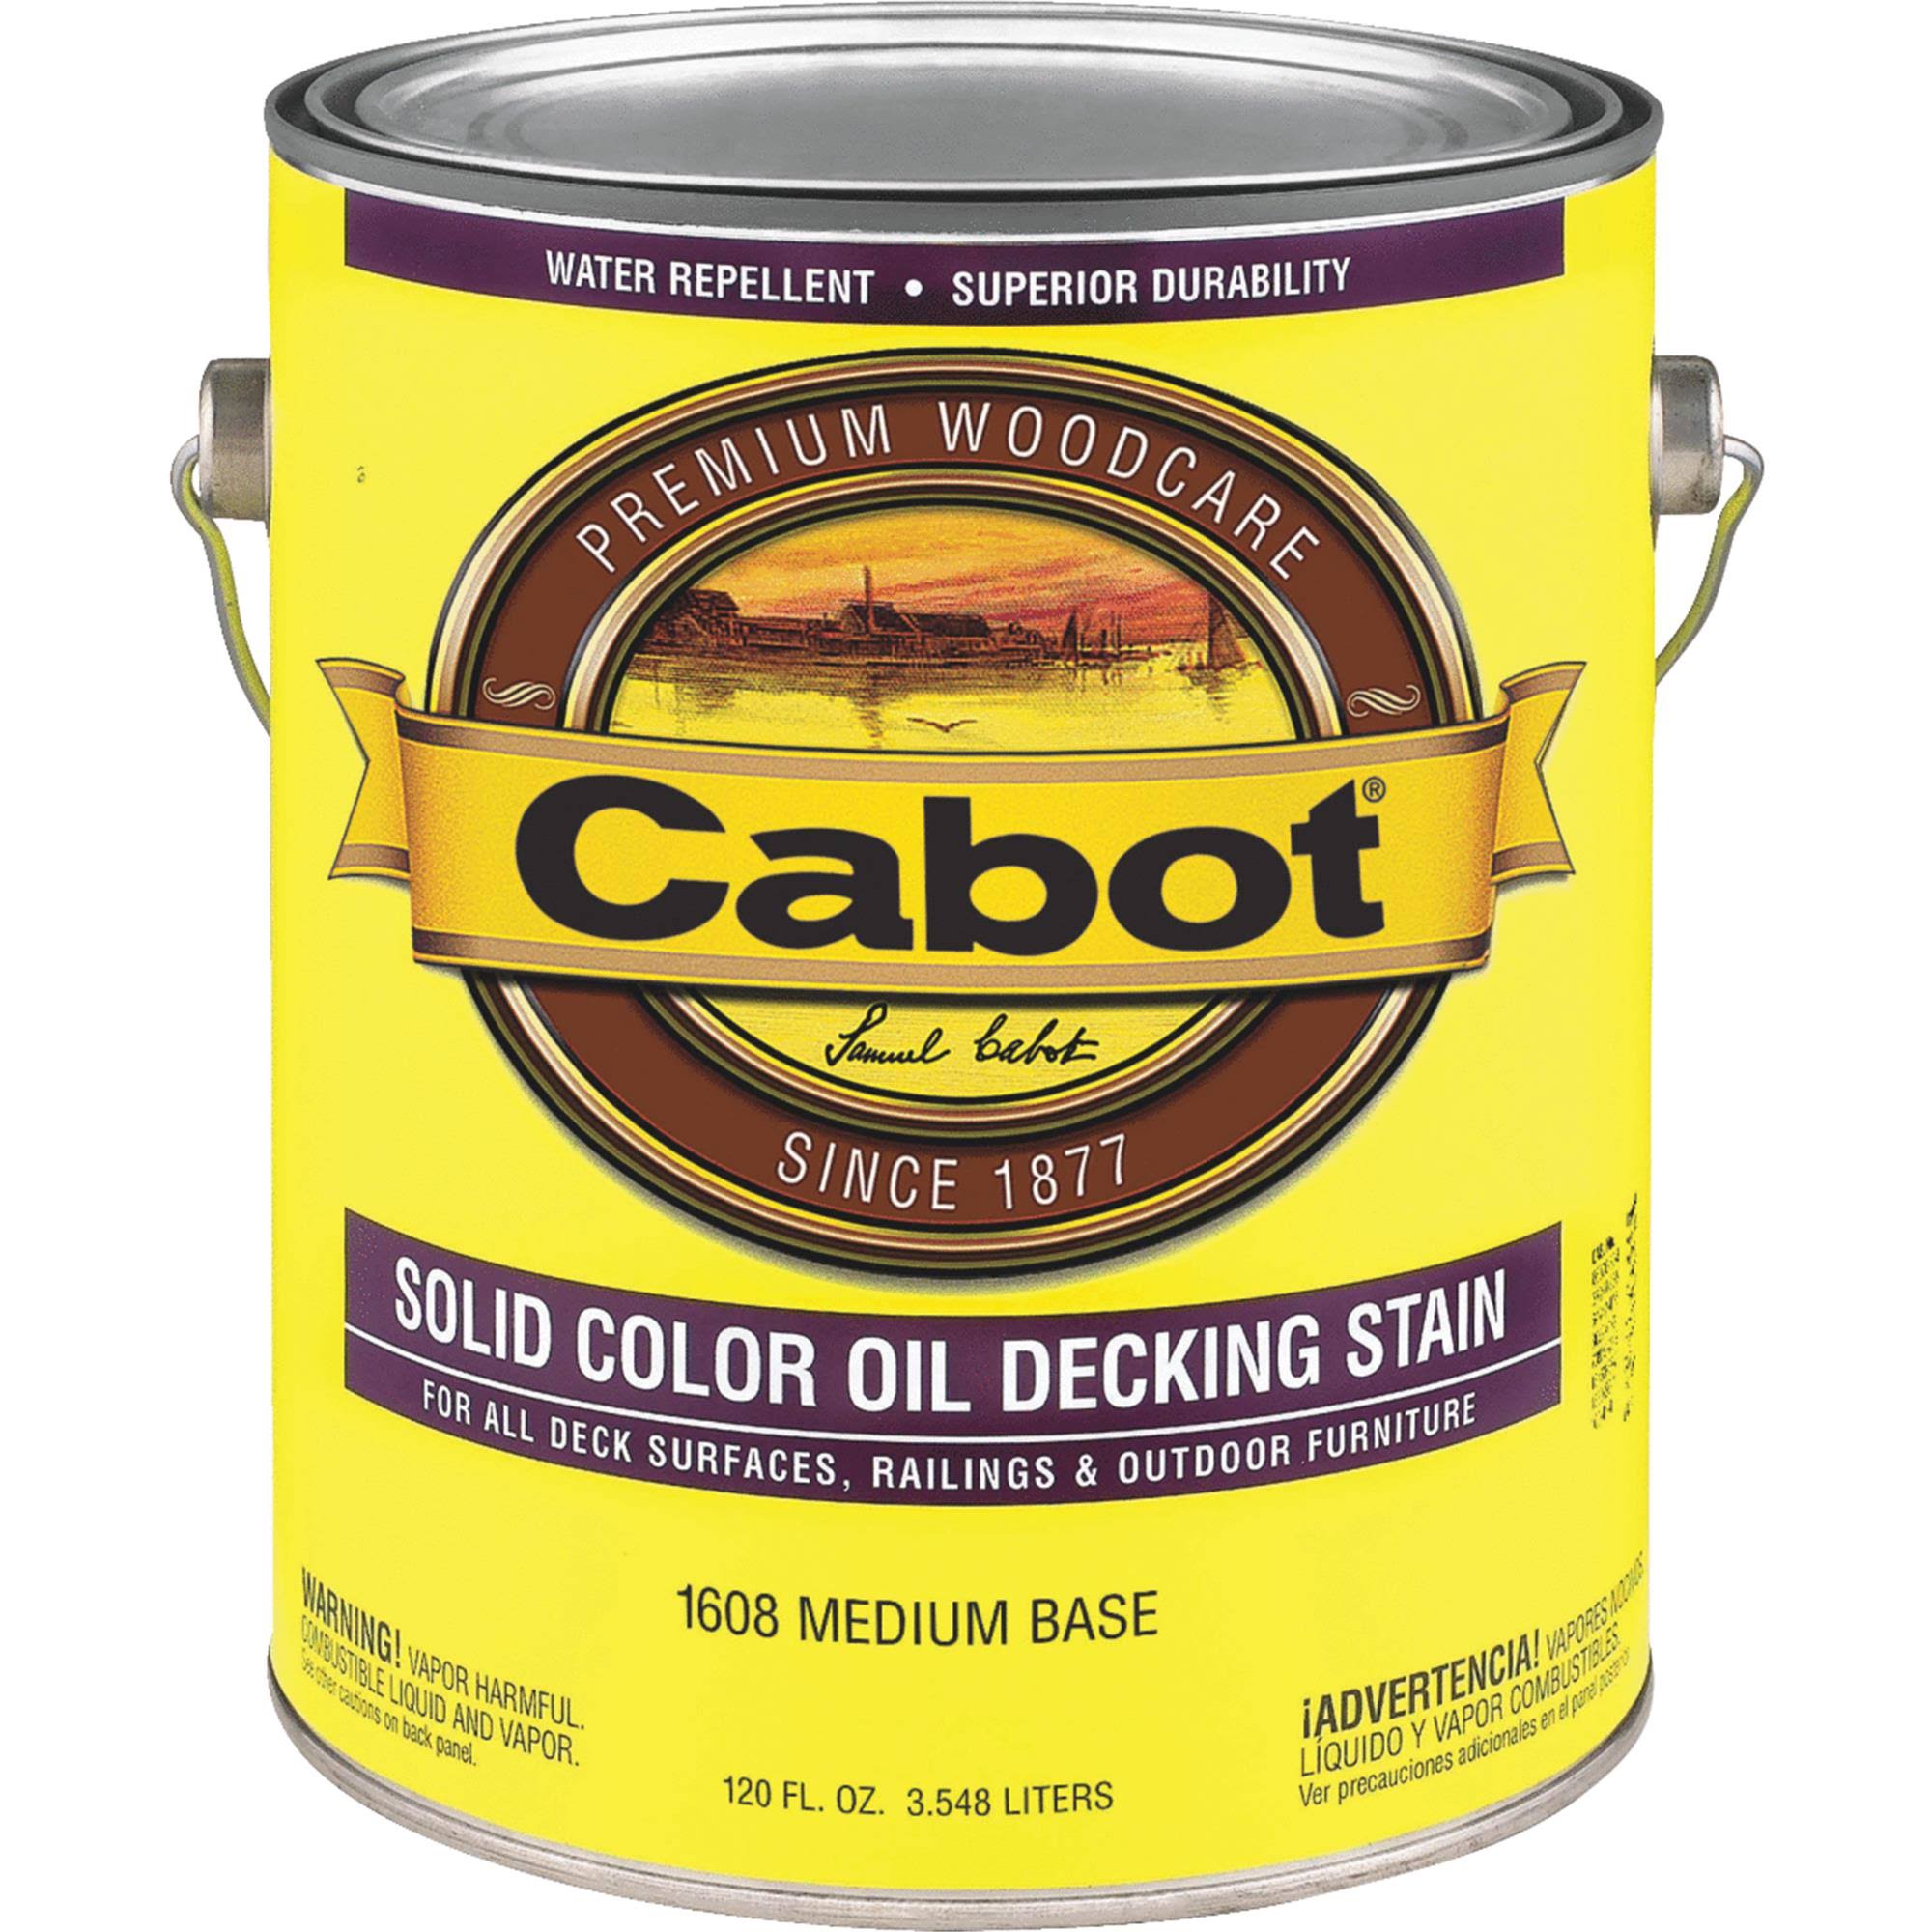 Cabot Solid Color Oil Decking Stain - 120oz, Medium Base